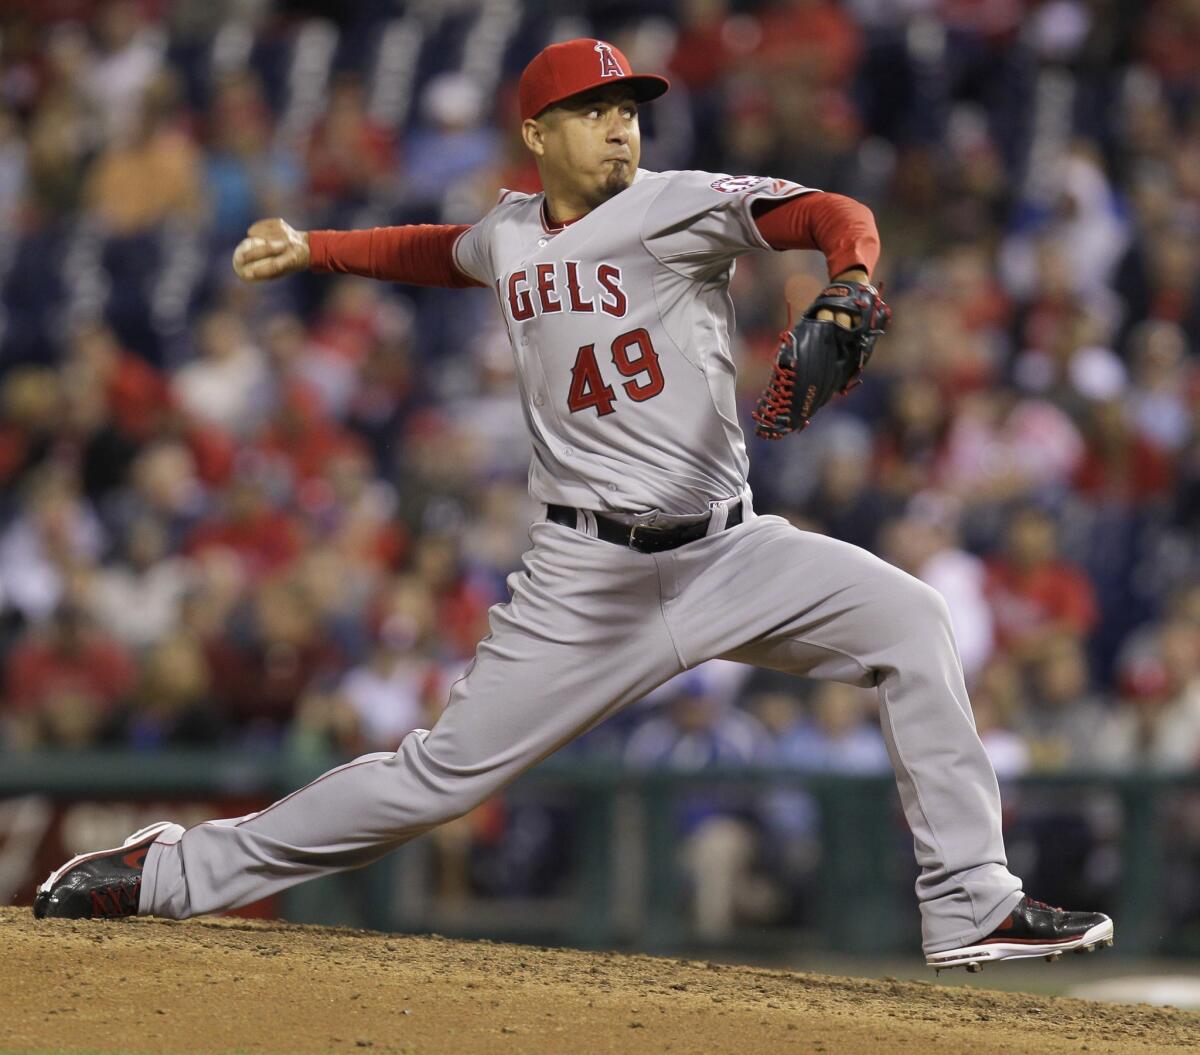 Ernesto Frieri pitches during the ninth inning of the Angels' 4-3 win over the Philadelphia Phillies on Tuesday at Citizens Bank Park.